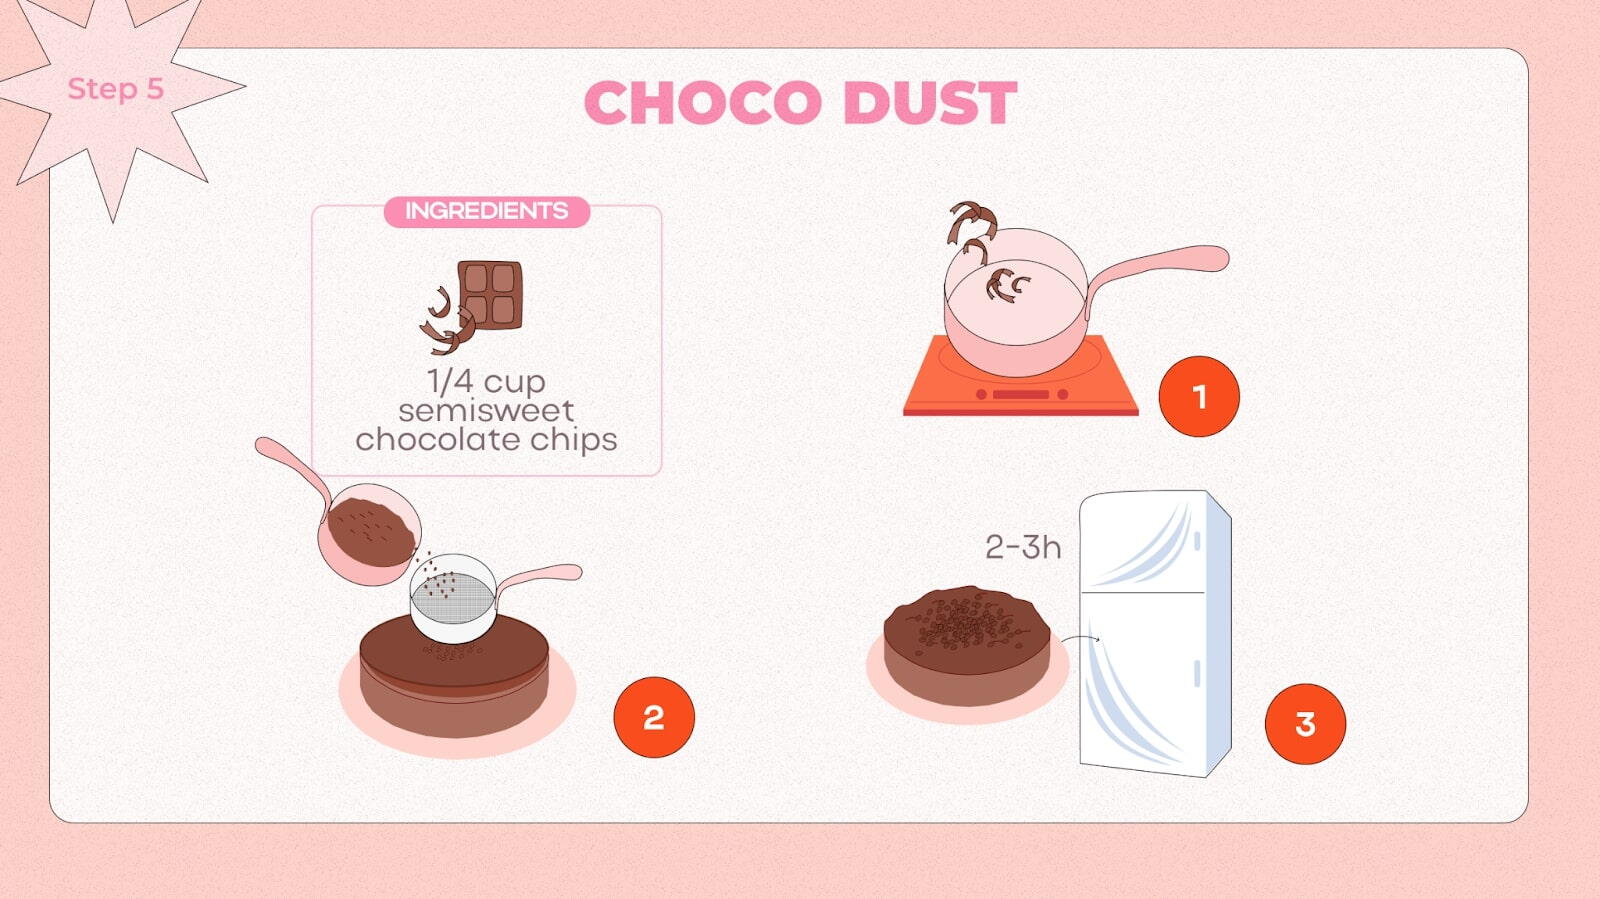 Instruction for make the Choco Dust